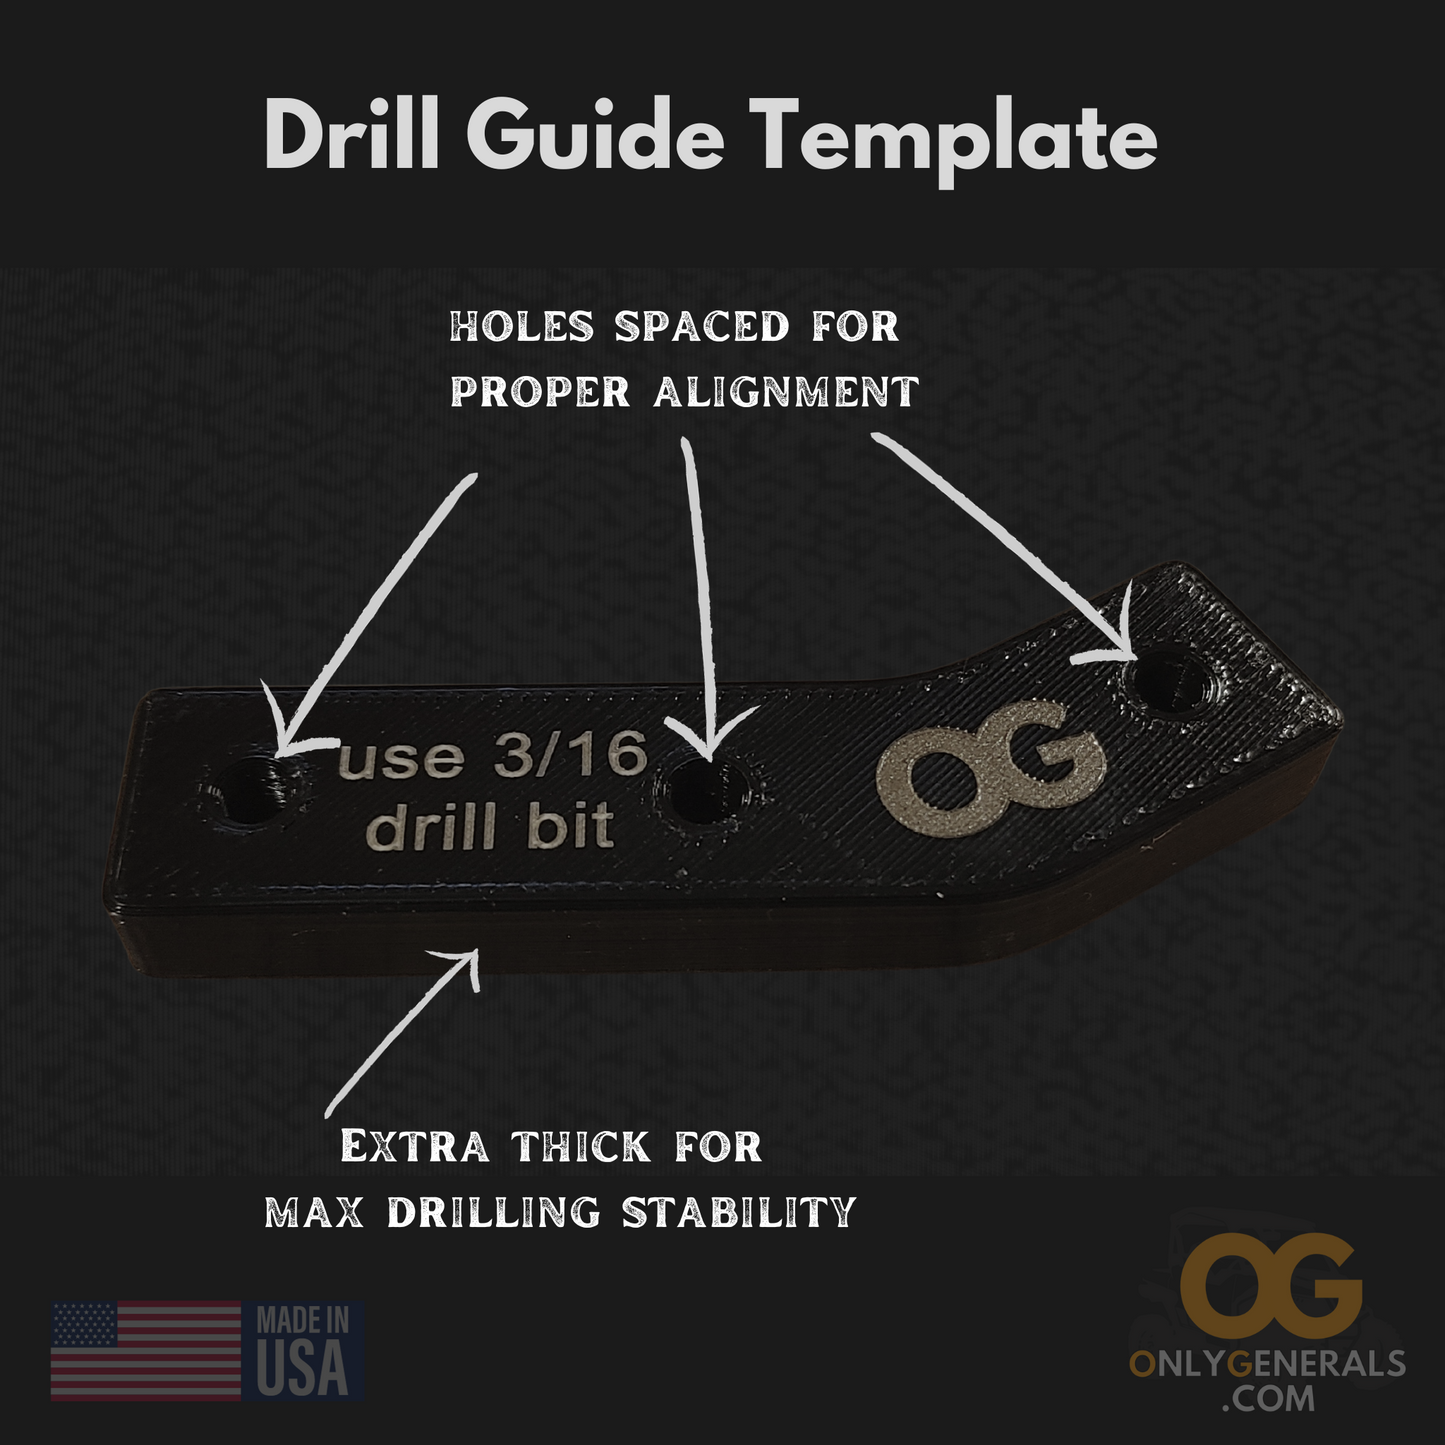 Text overlay on image of OG's drill guide dictating what the component is for the Polaris General tip-out 3rd row insert kit by OnlyGenerals